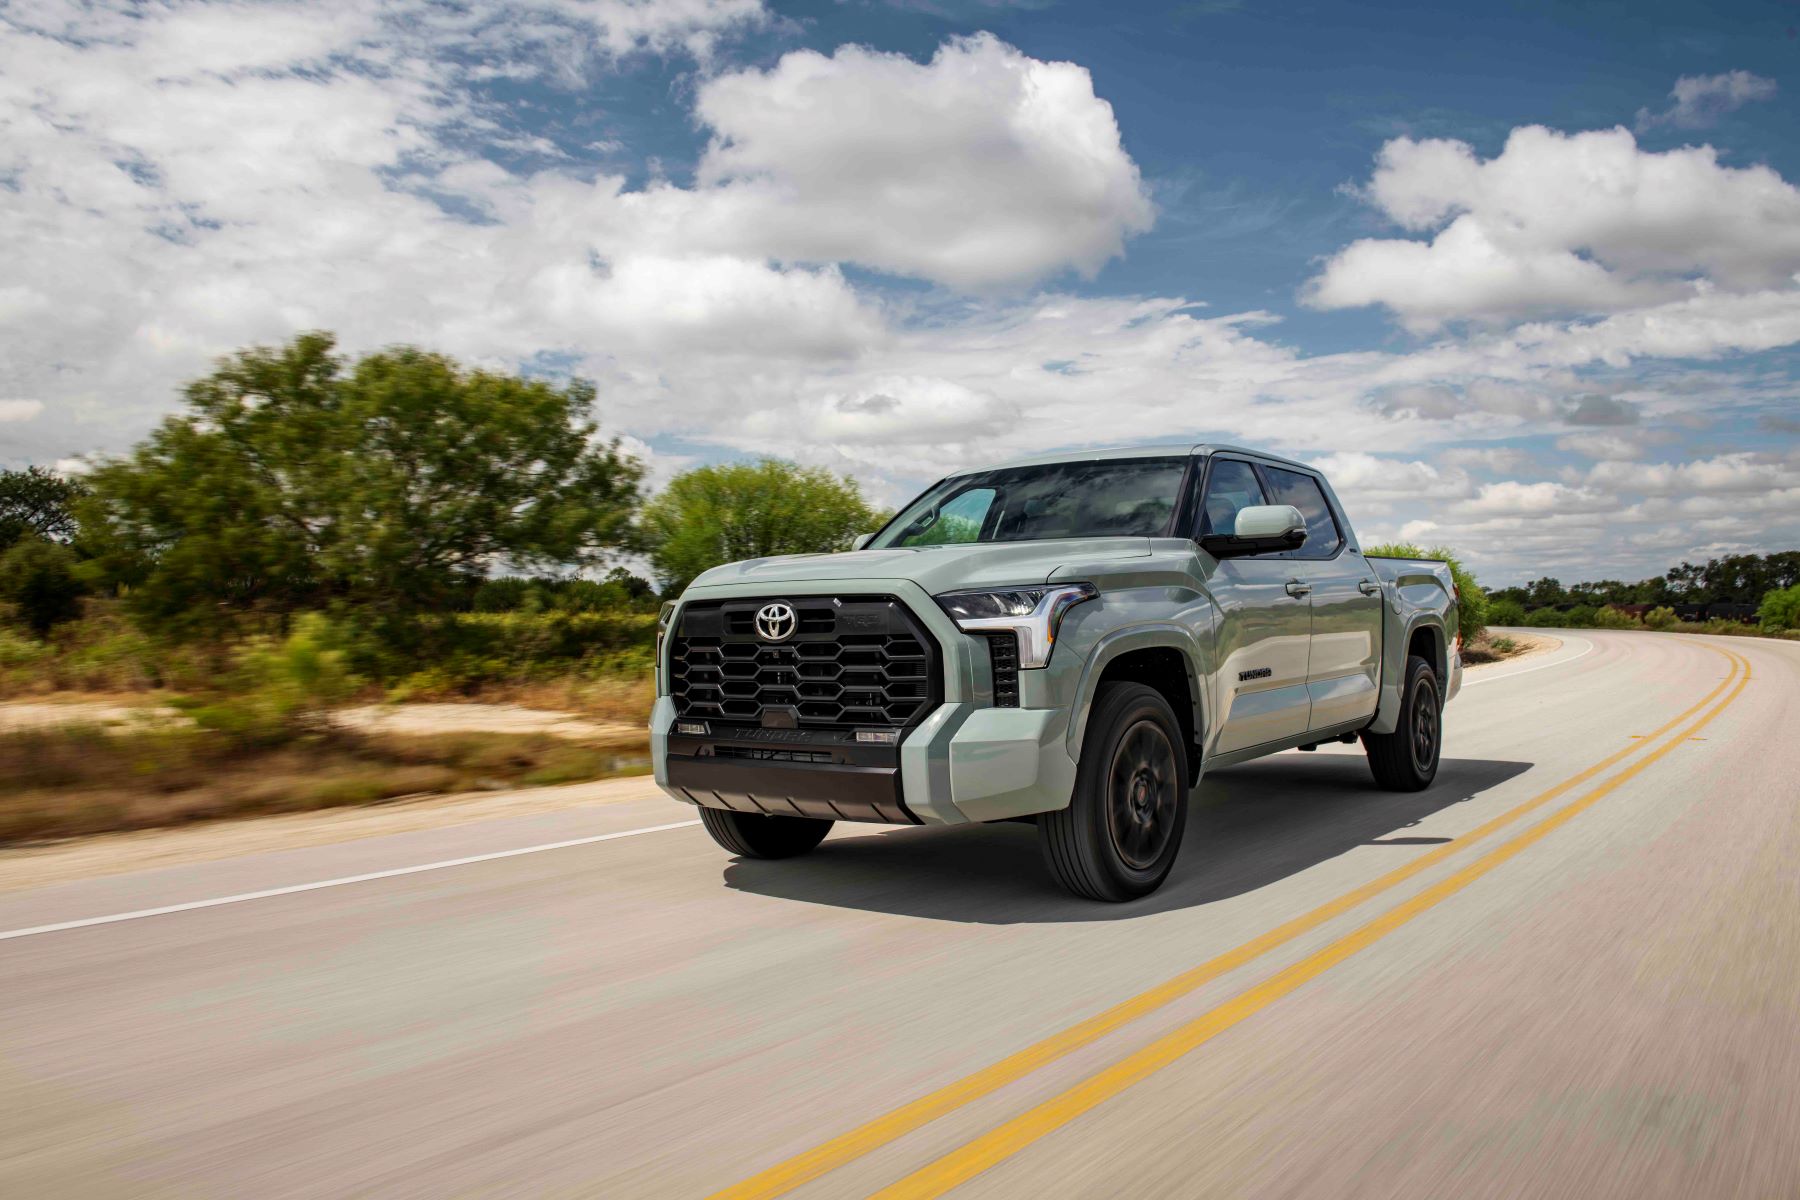 The 2022 Toyota SR5 TRD-Sport full-size pickup truck with Luna Rock paint color option driving down a country highway